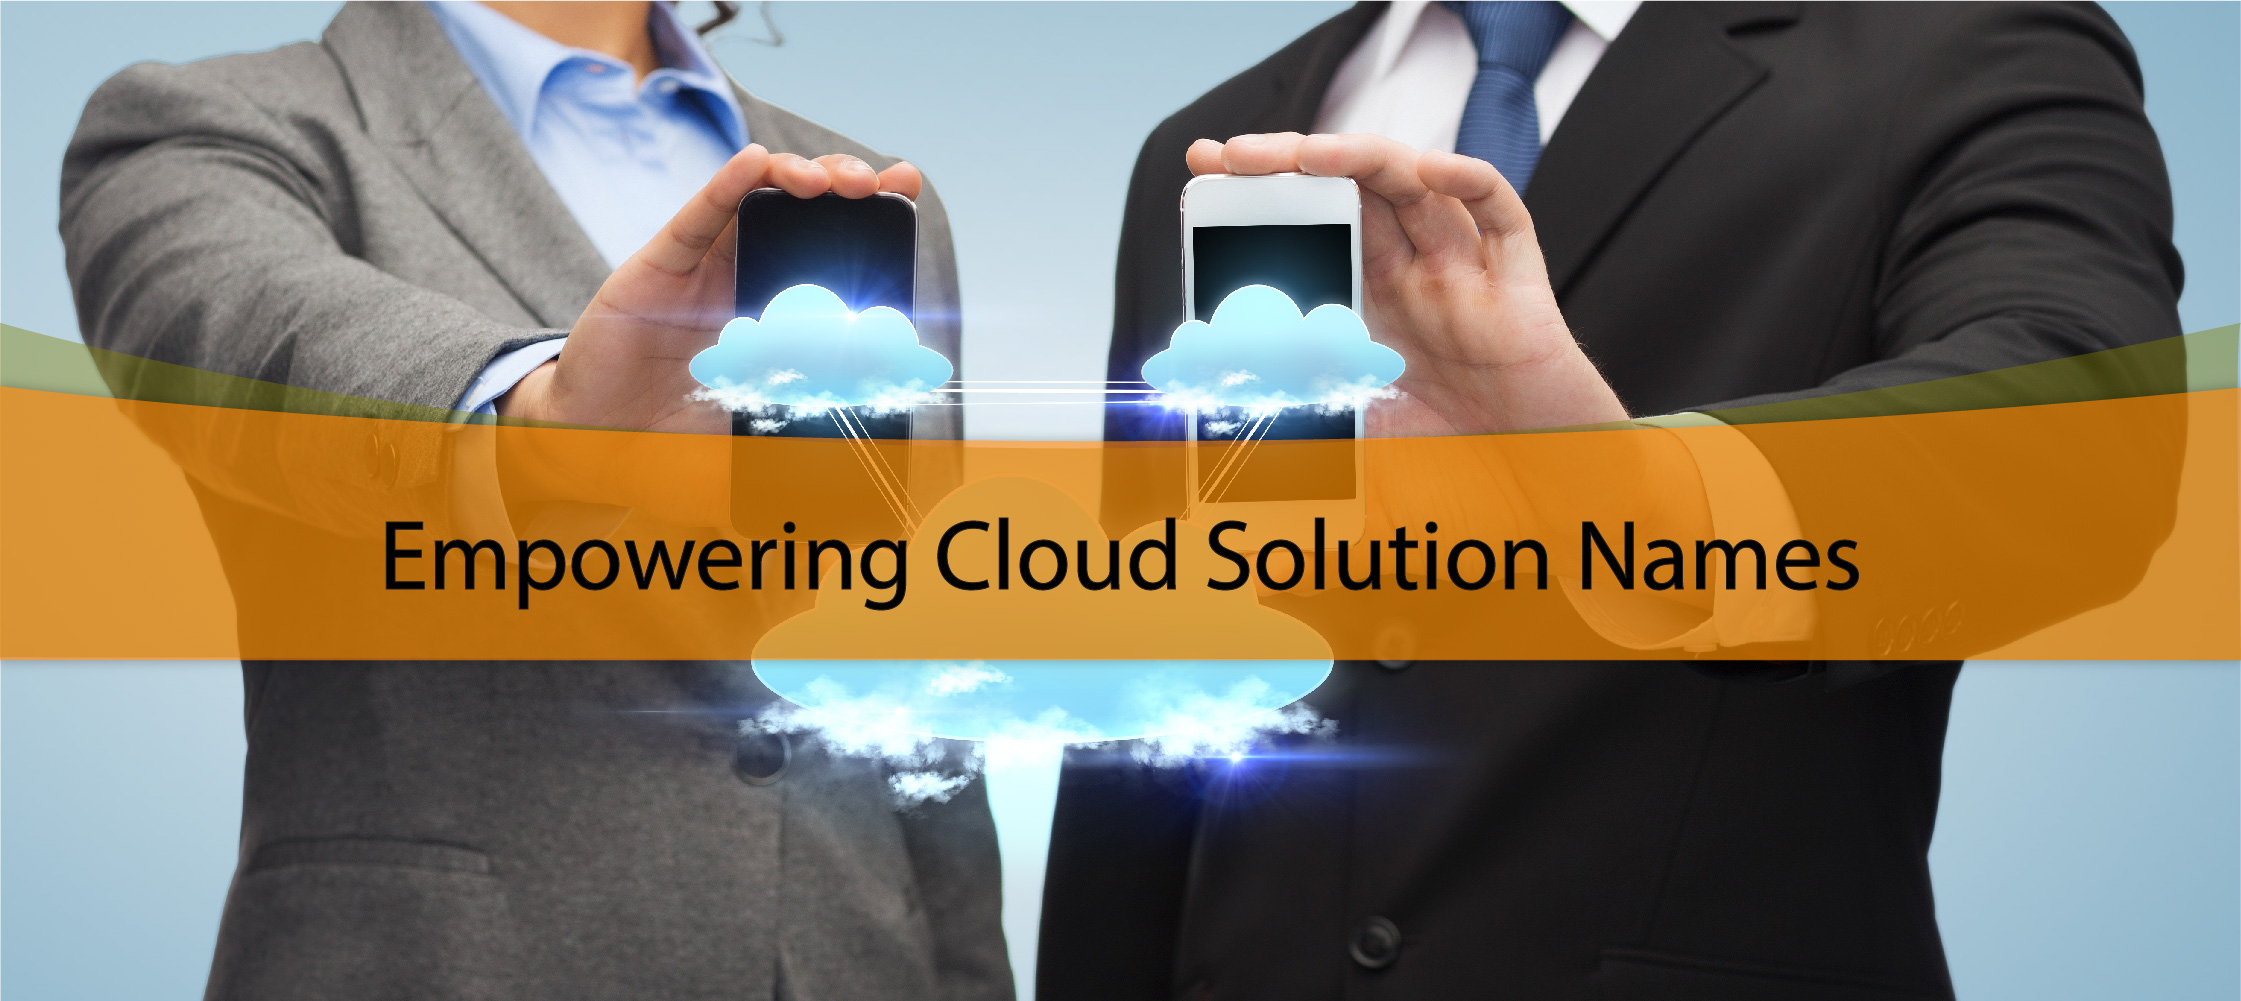 Empowering Cloud Solution Names